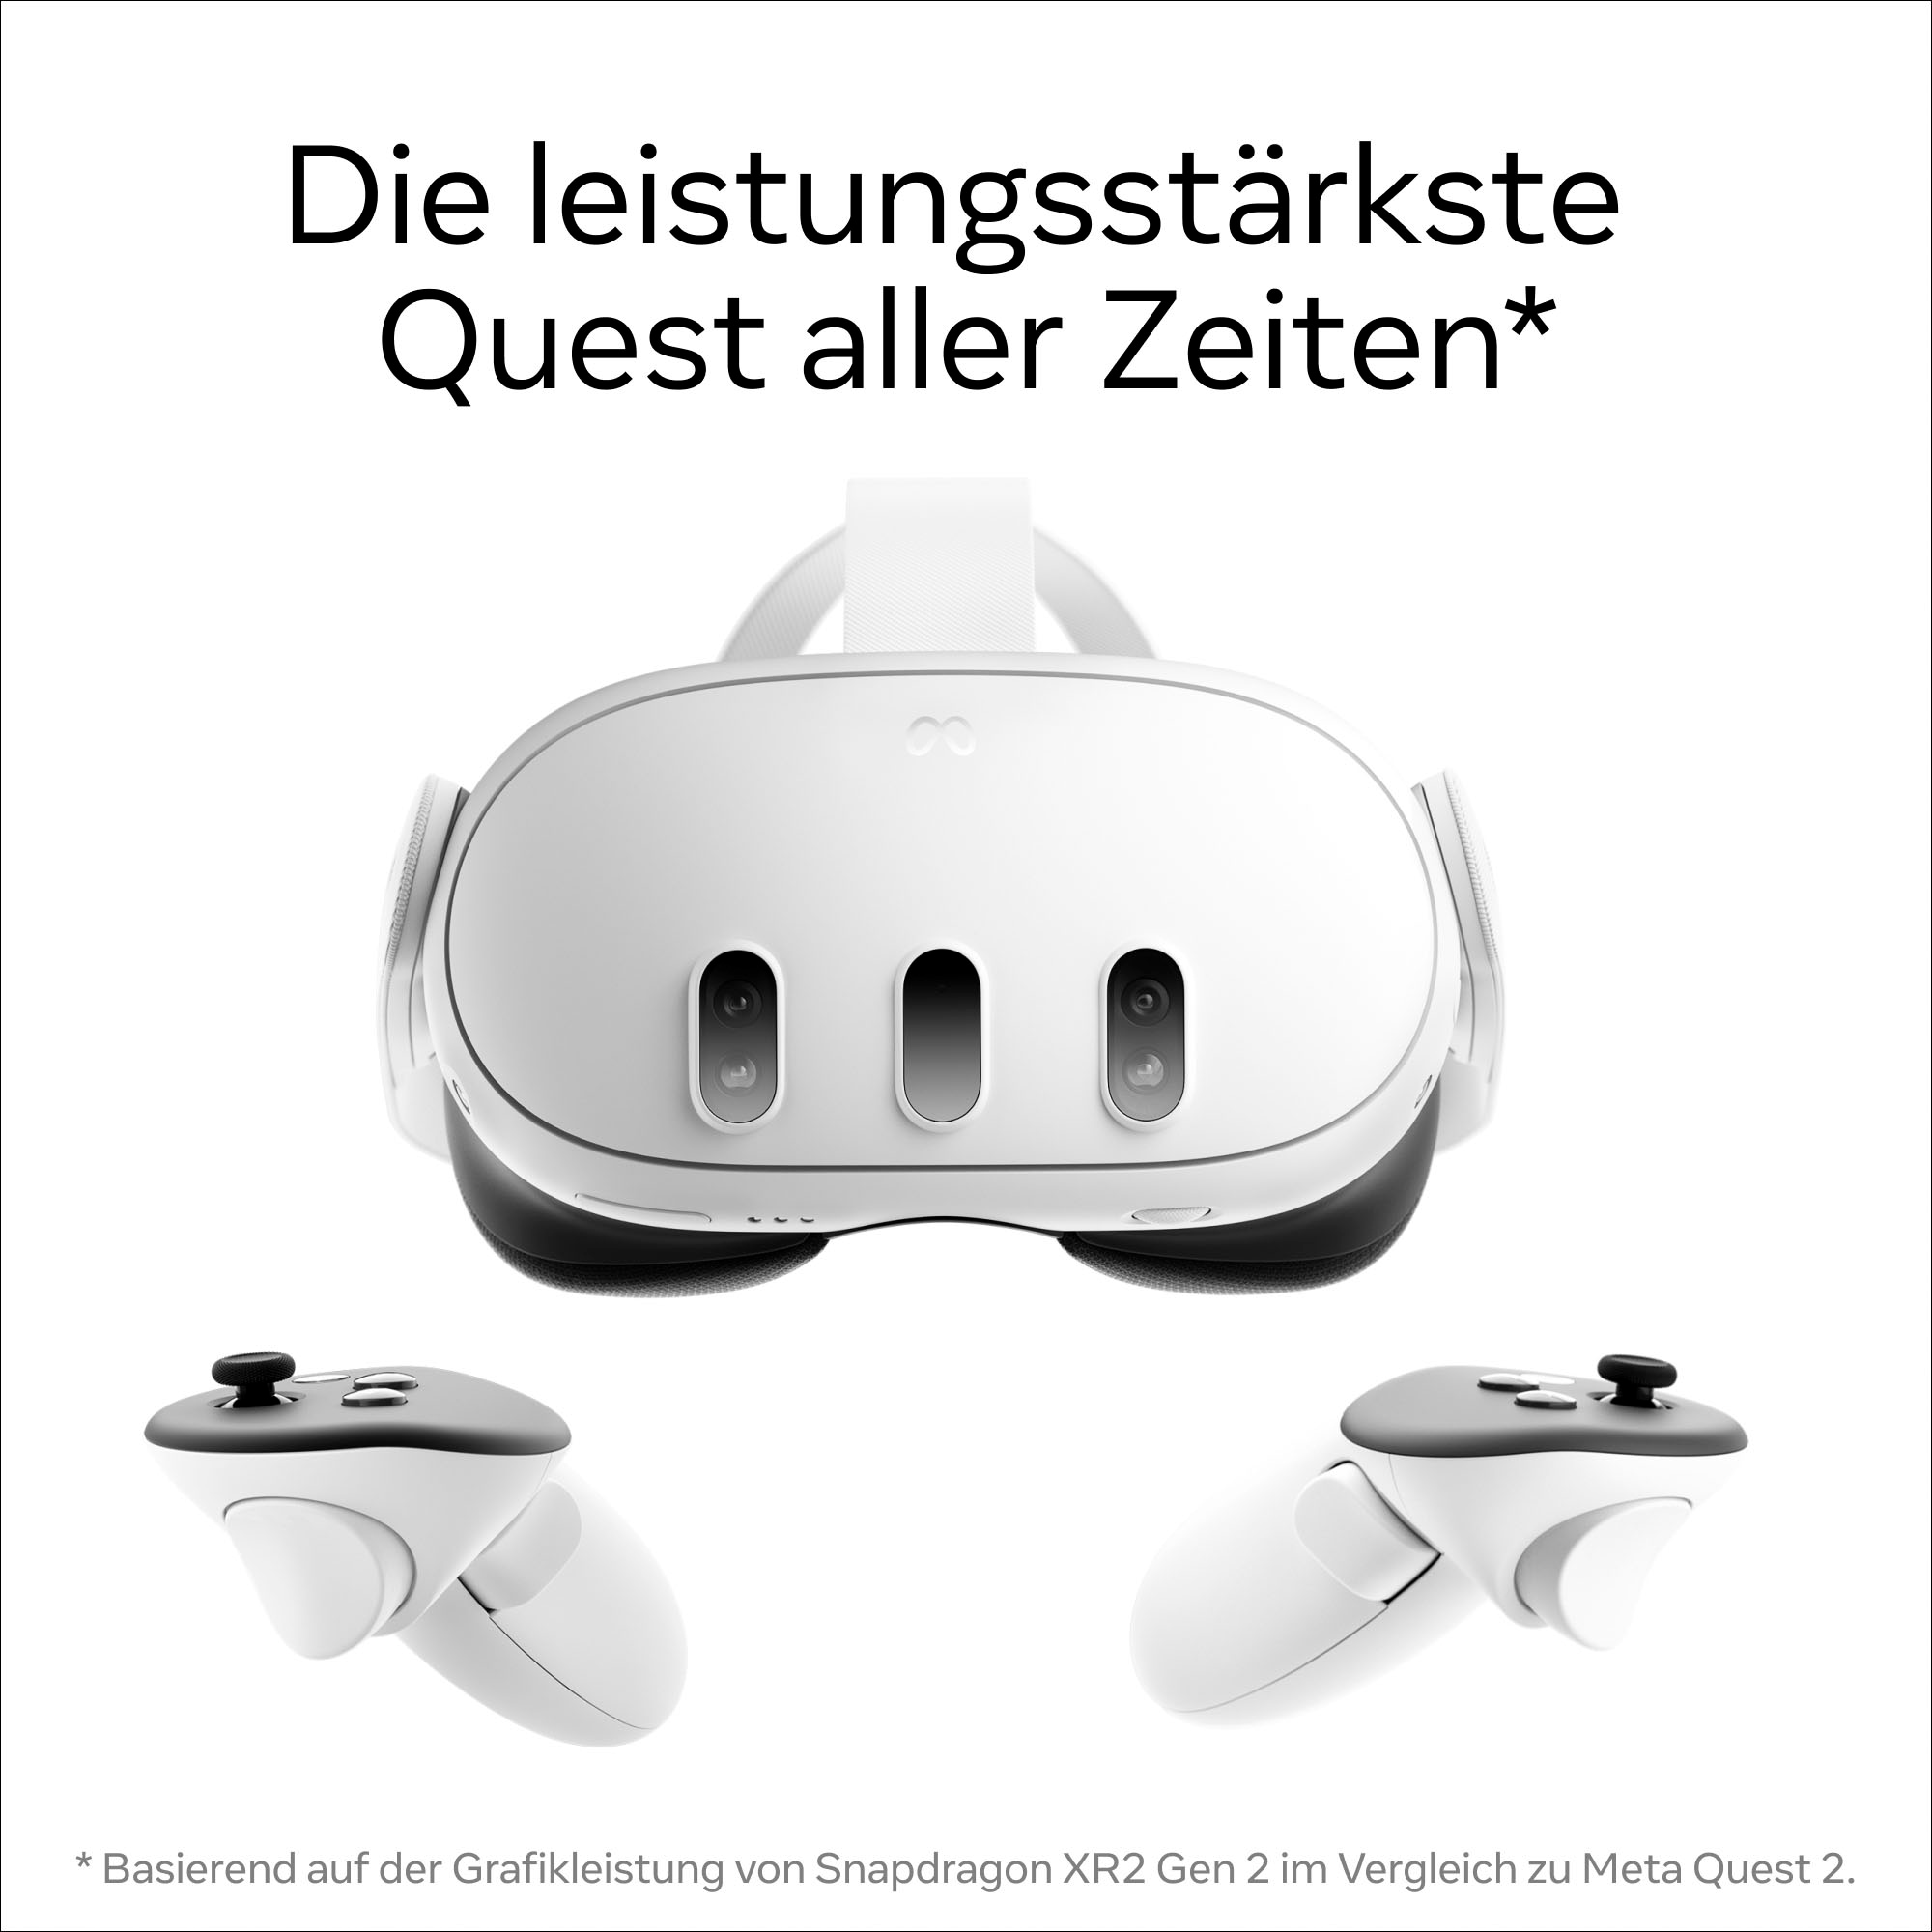 Meta Virtual-Reality-Brille »Quest 3«, (Packung)